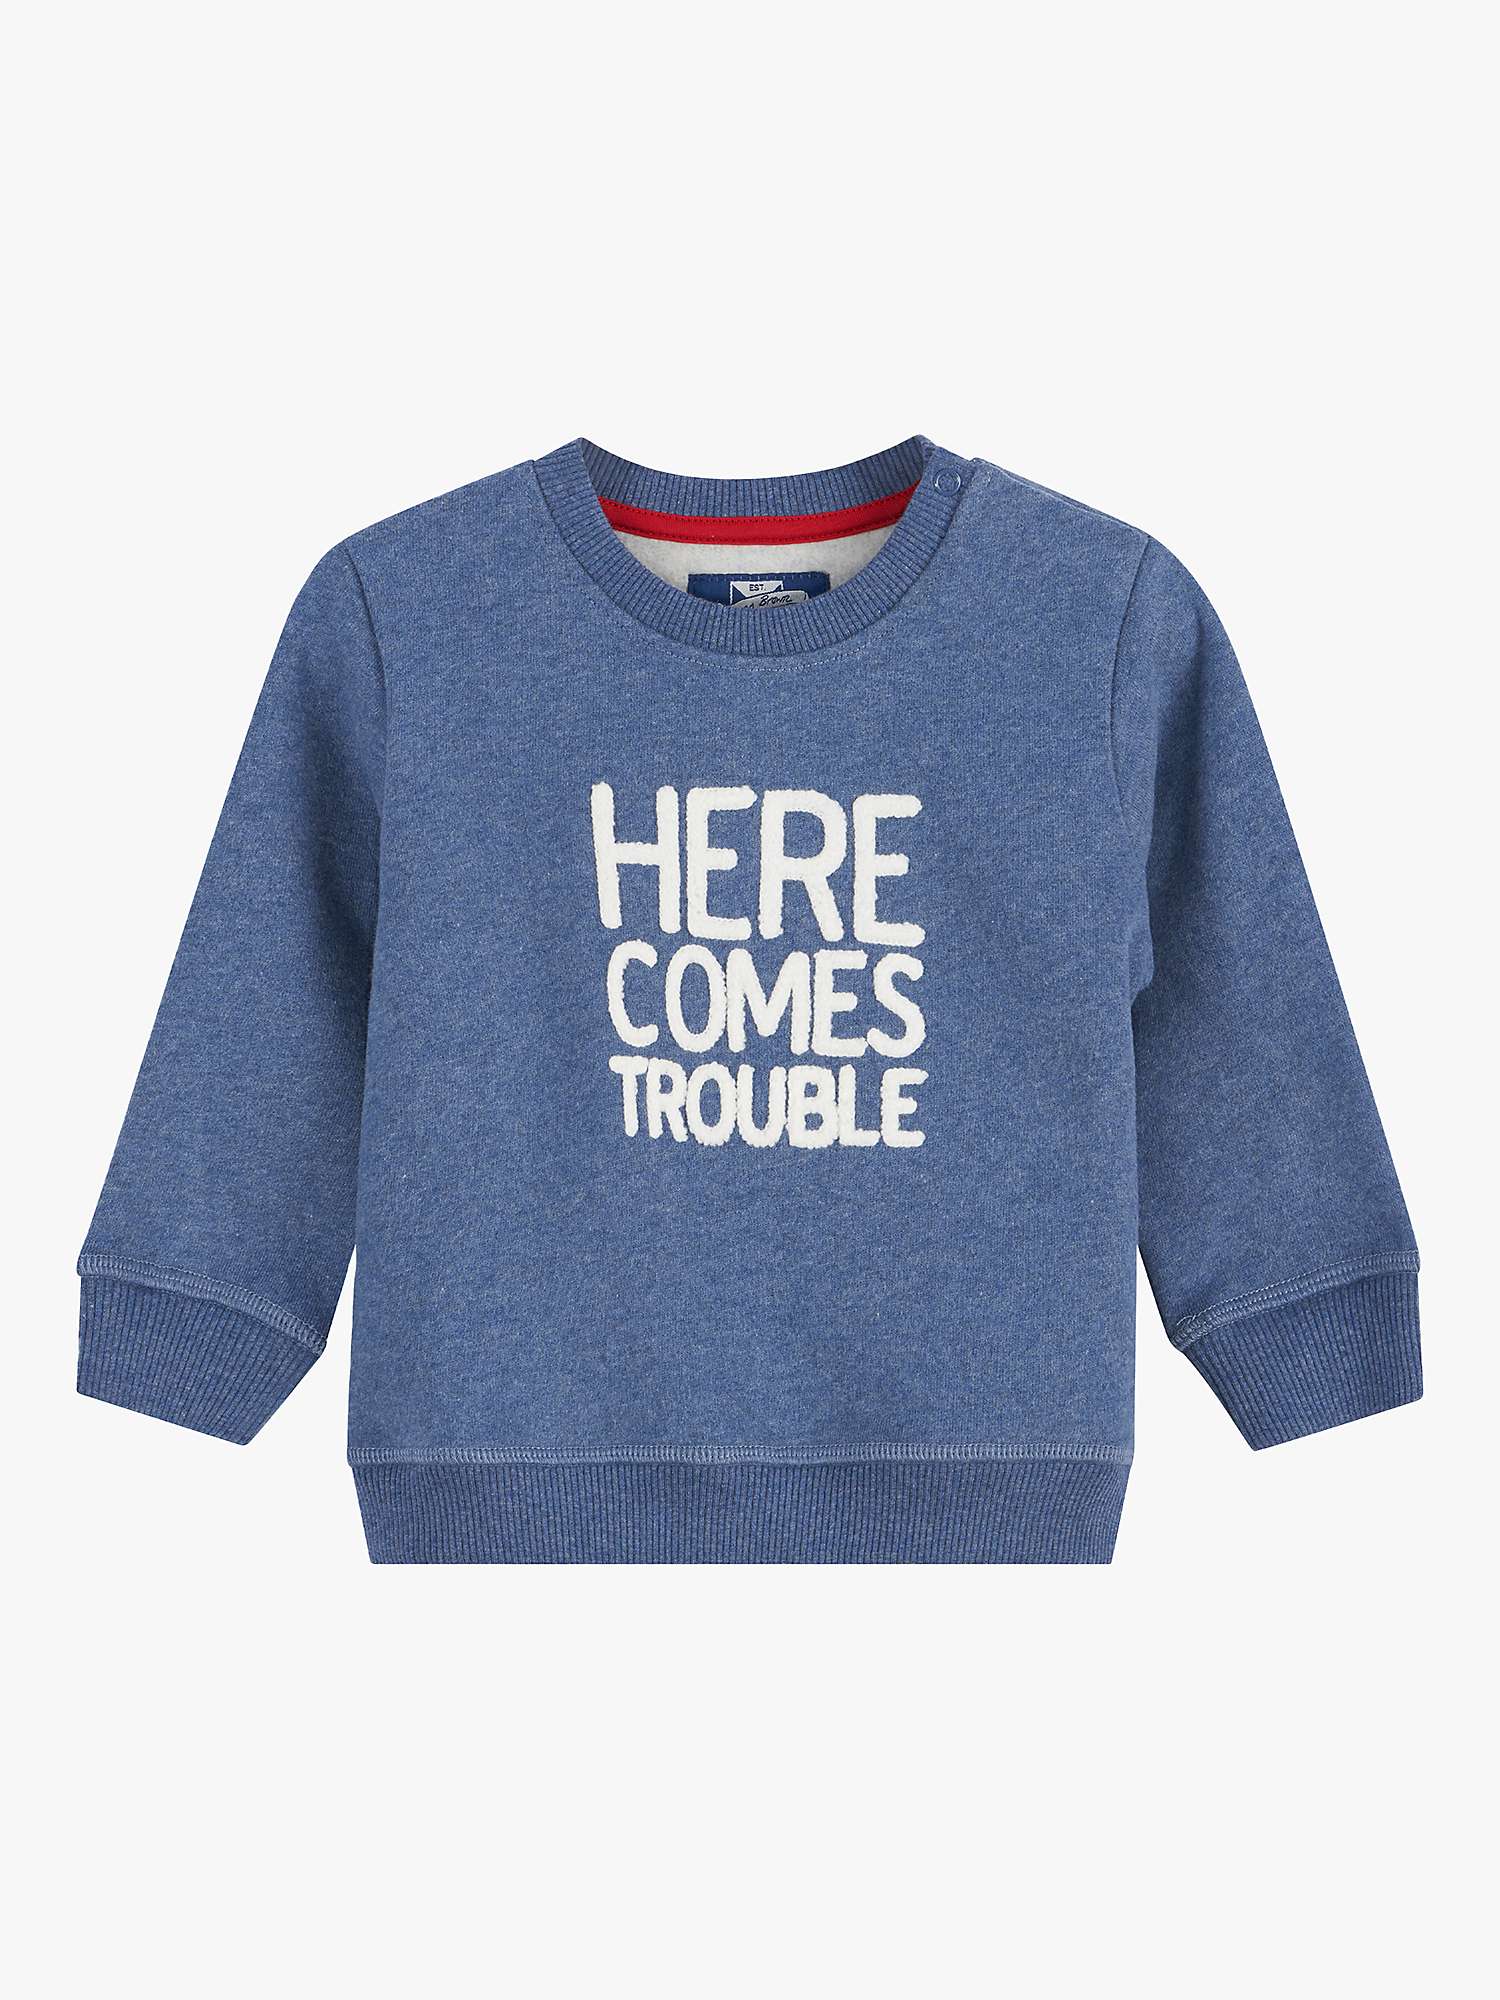 Buy Trotters Baby Here Comes Trouble Sweatshirt Online at johnlewis.com